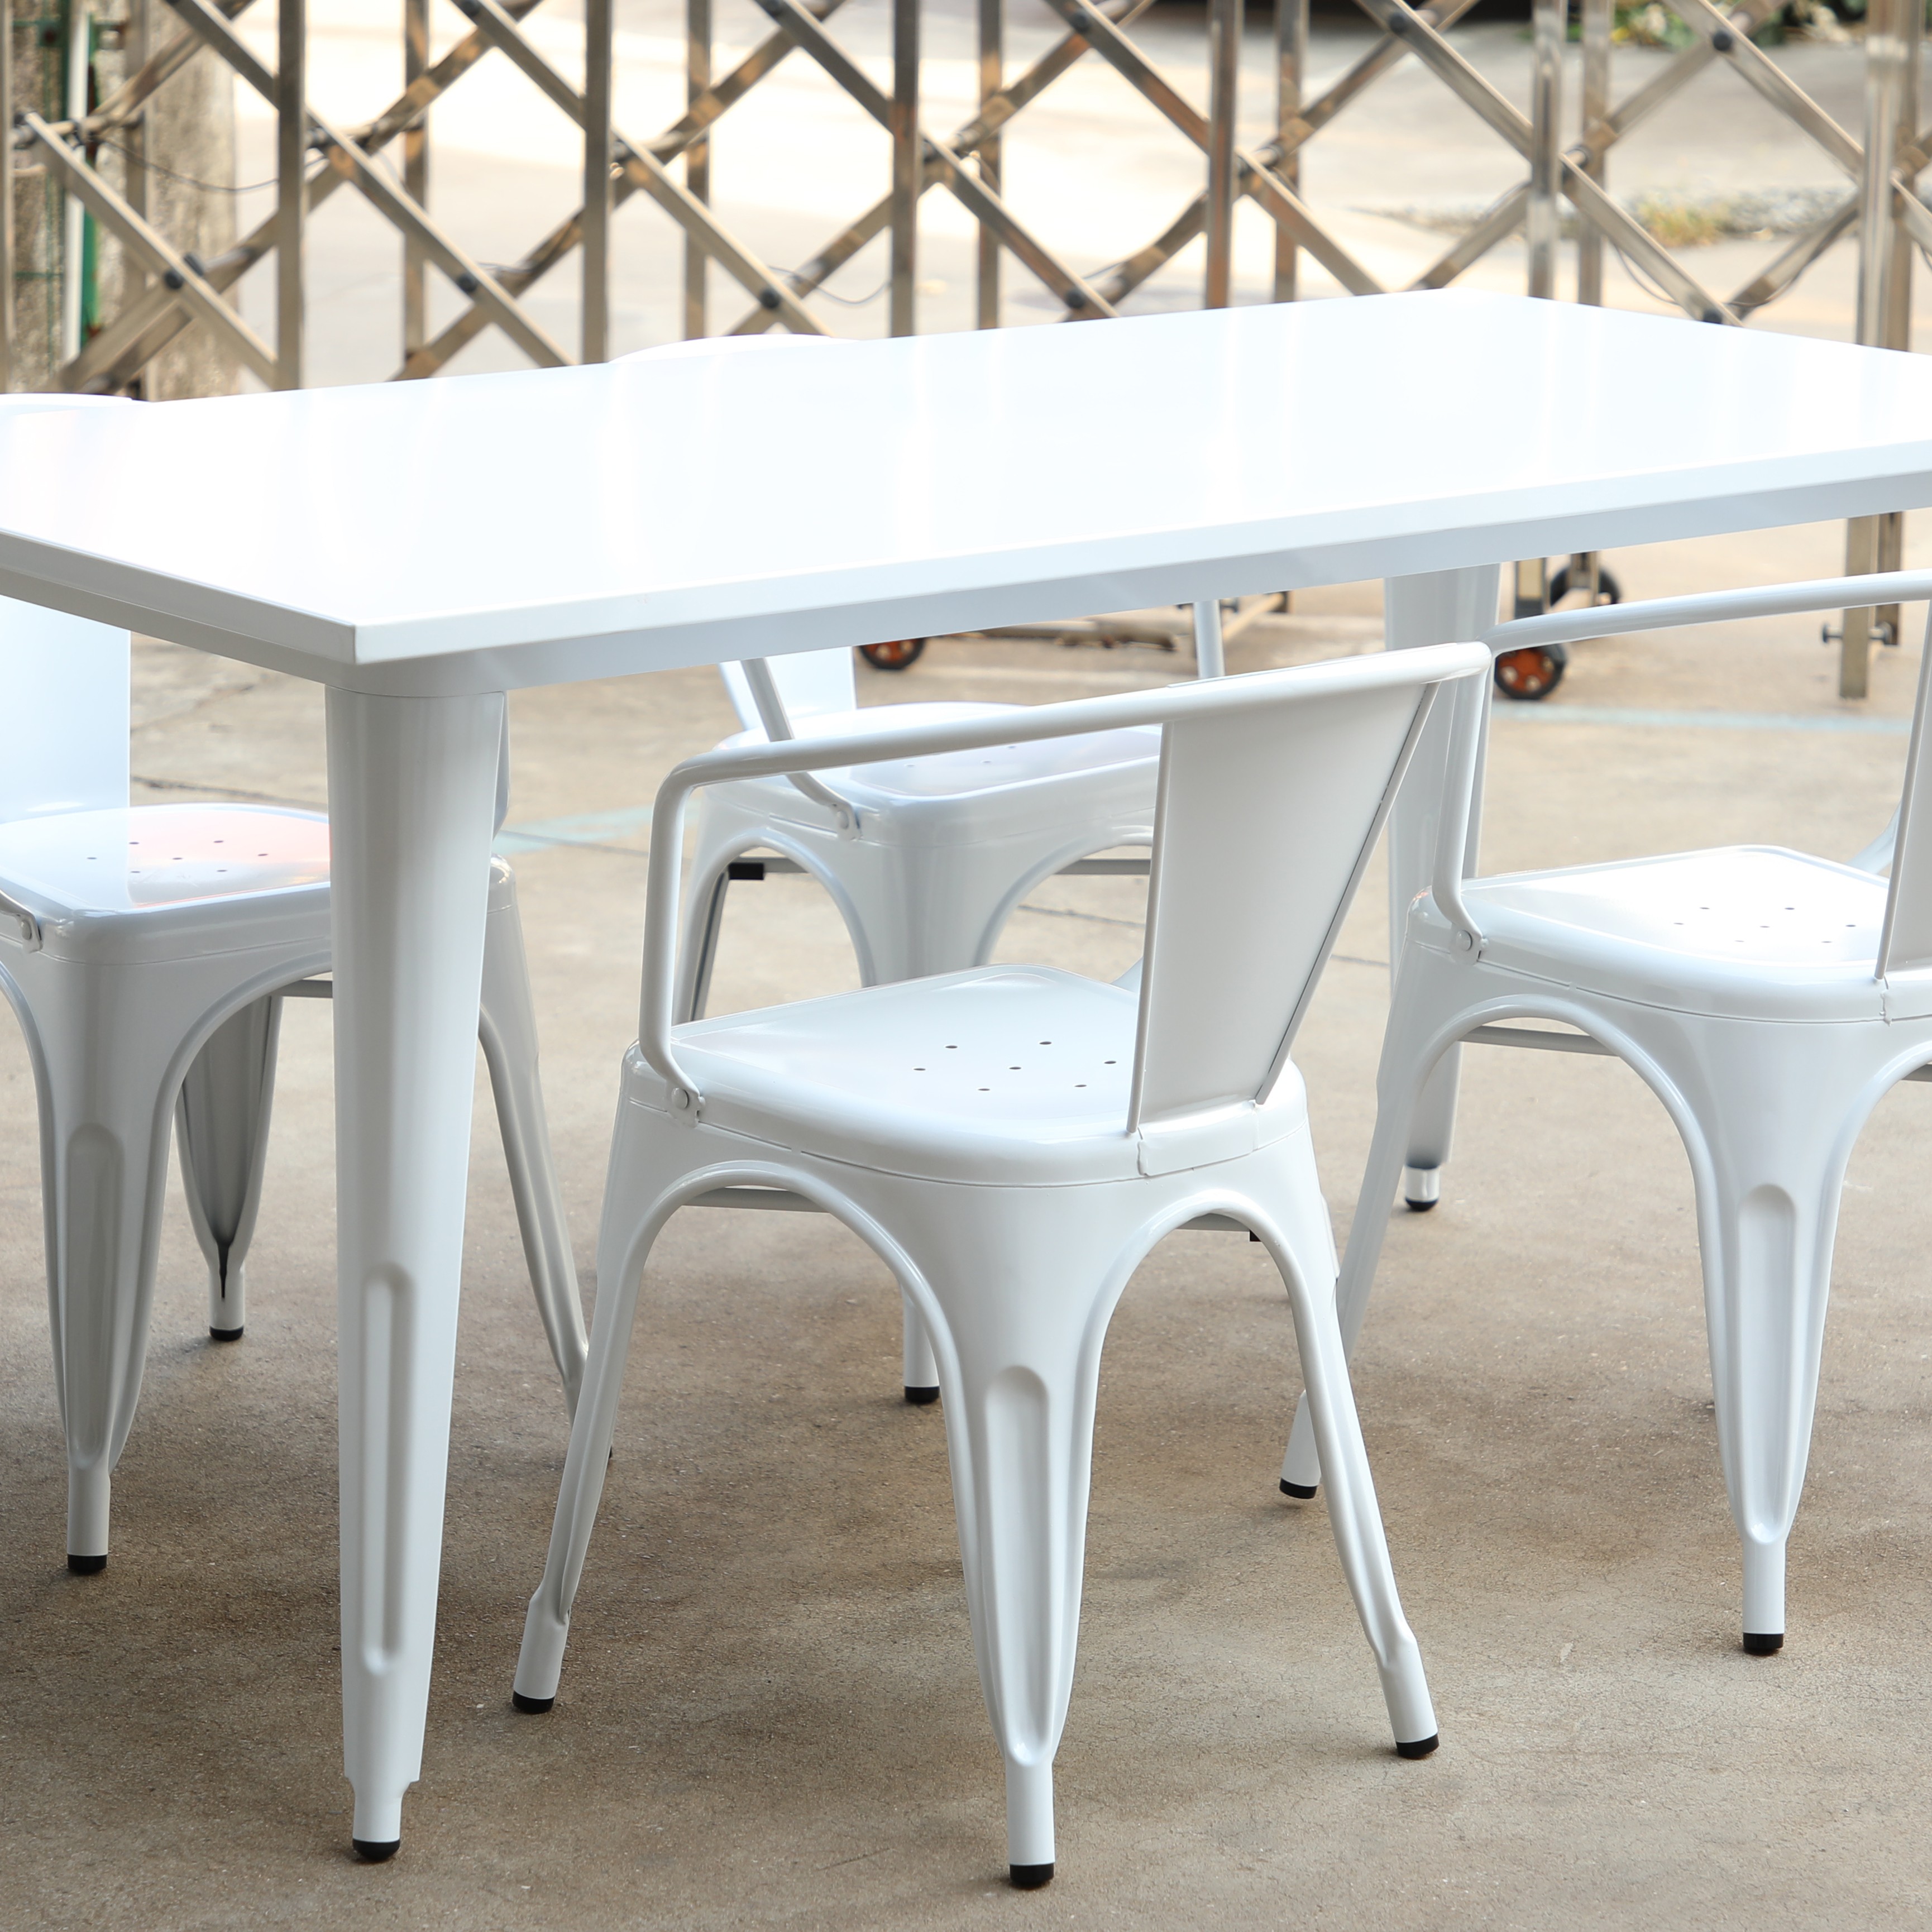 https://www.goldapplefurniture.com/metal-steel- Dining-table-for-outdoor-use-ga101t-product/